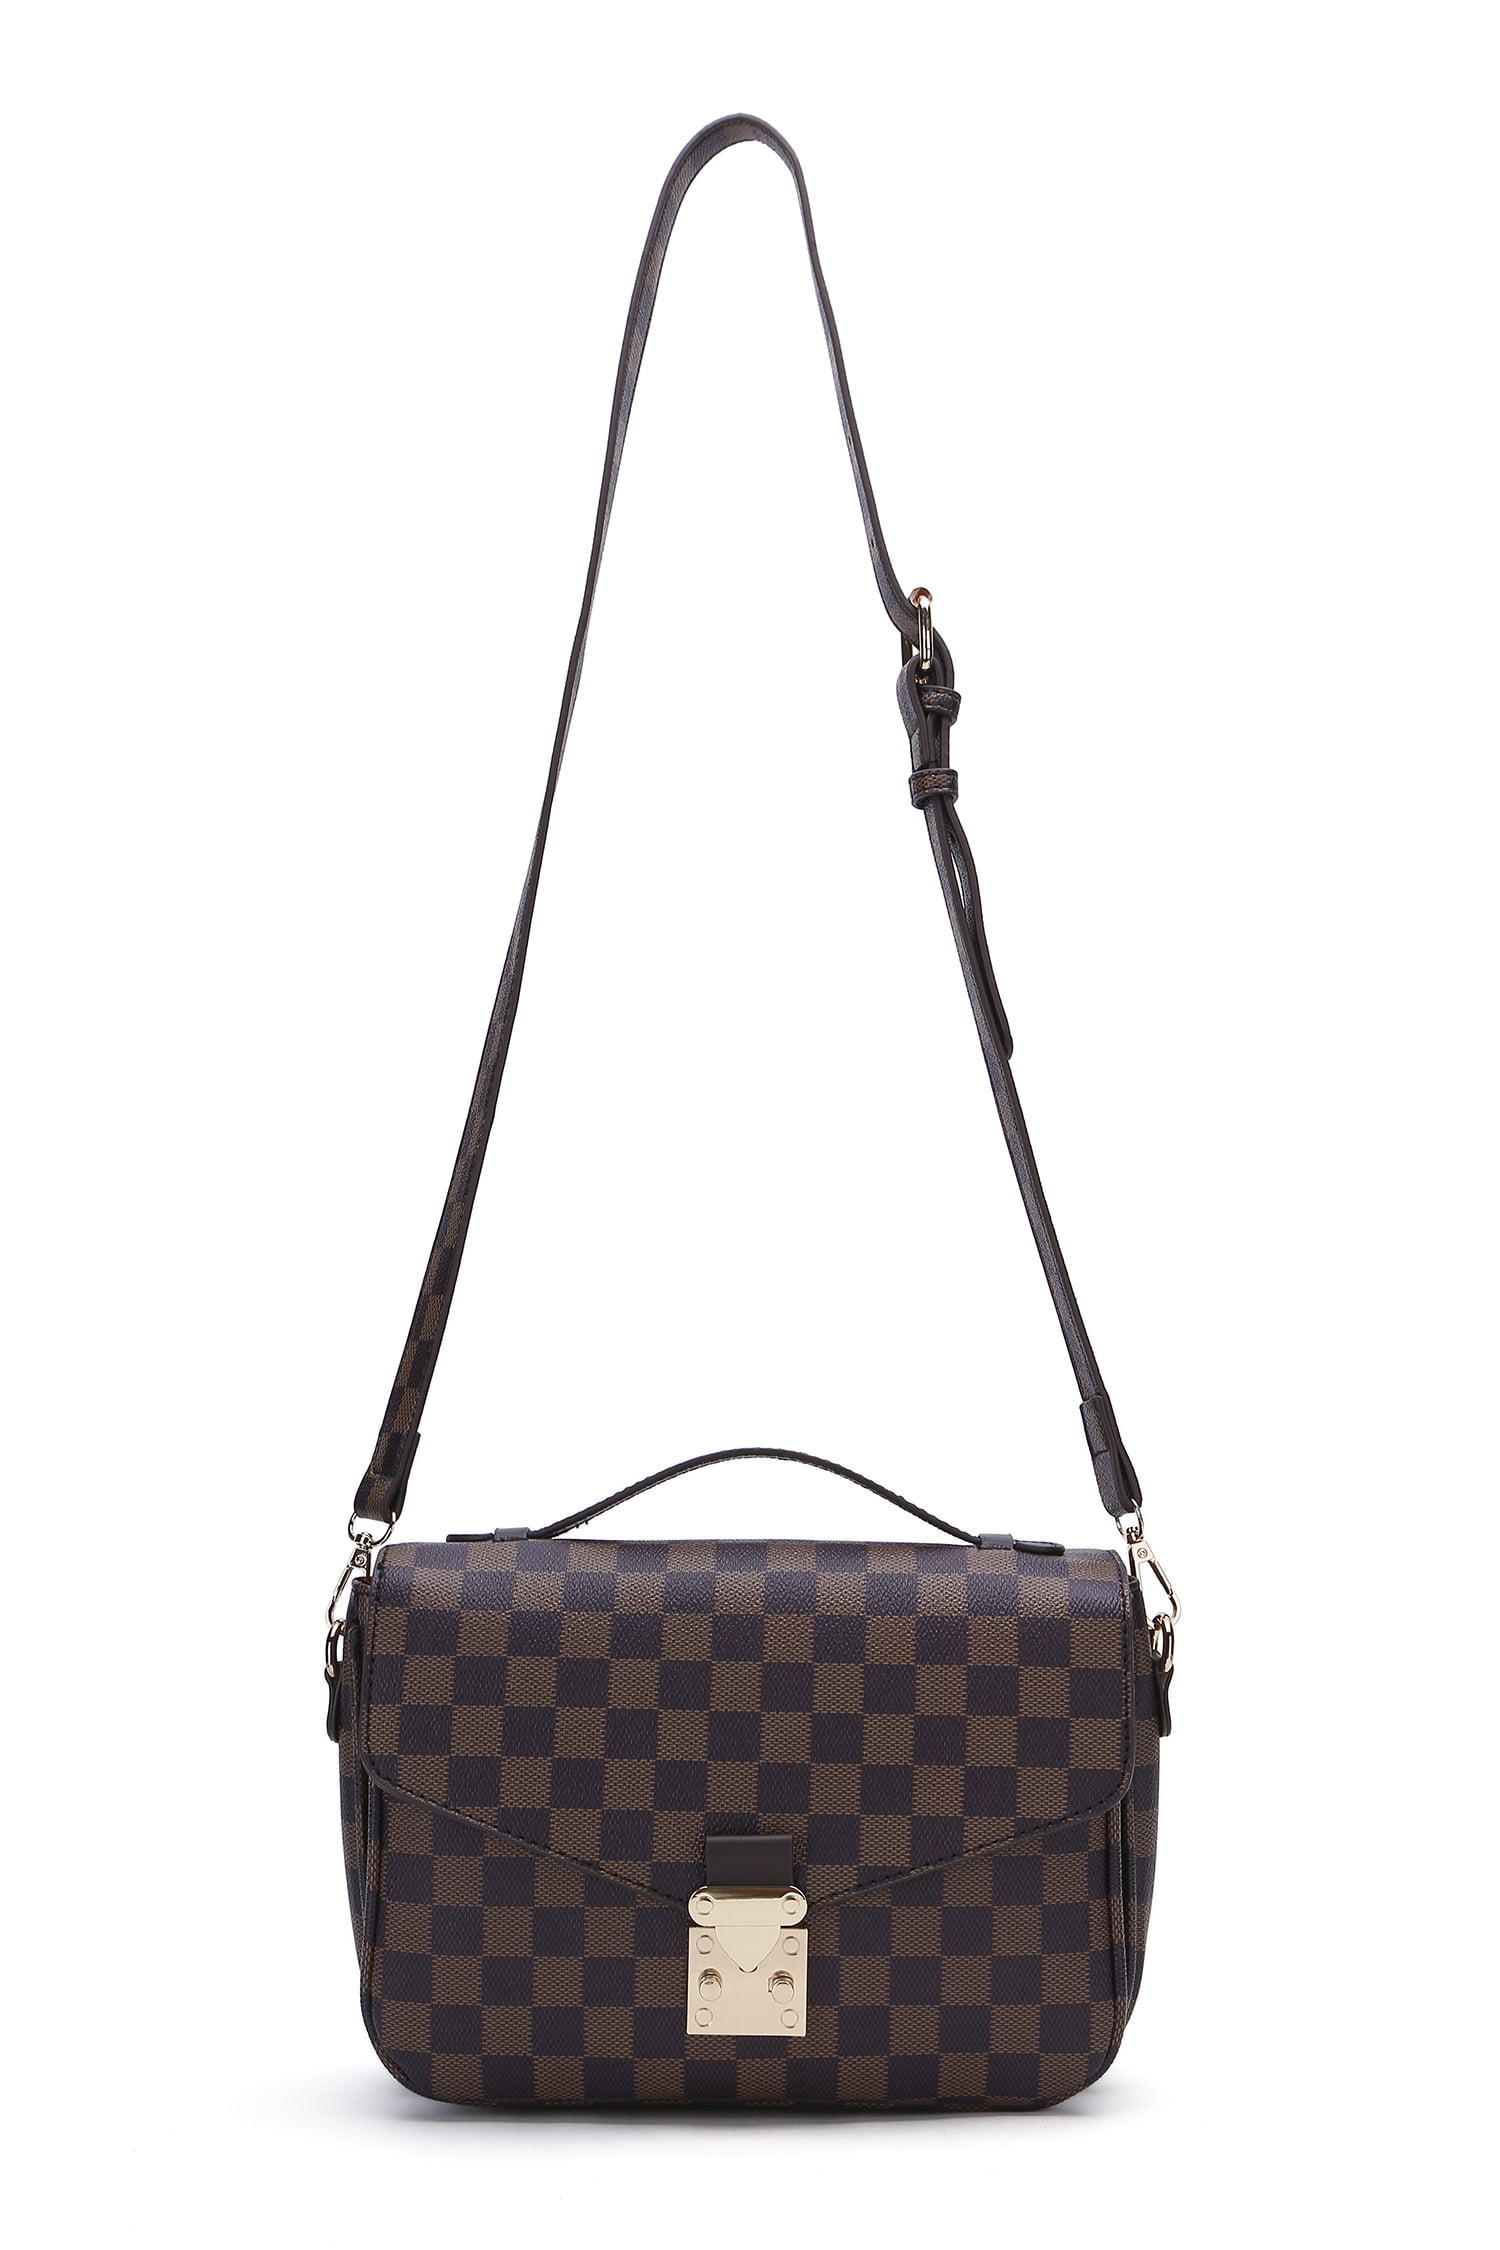 MK Gdledy Brown Checkered Crossbody Bags for Women Multipurpose Handbags  Leather Shoulder with Coin Purse including 3 Size Bag - Brown2 